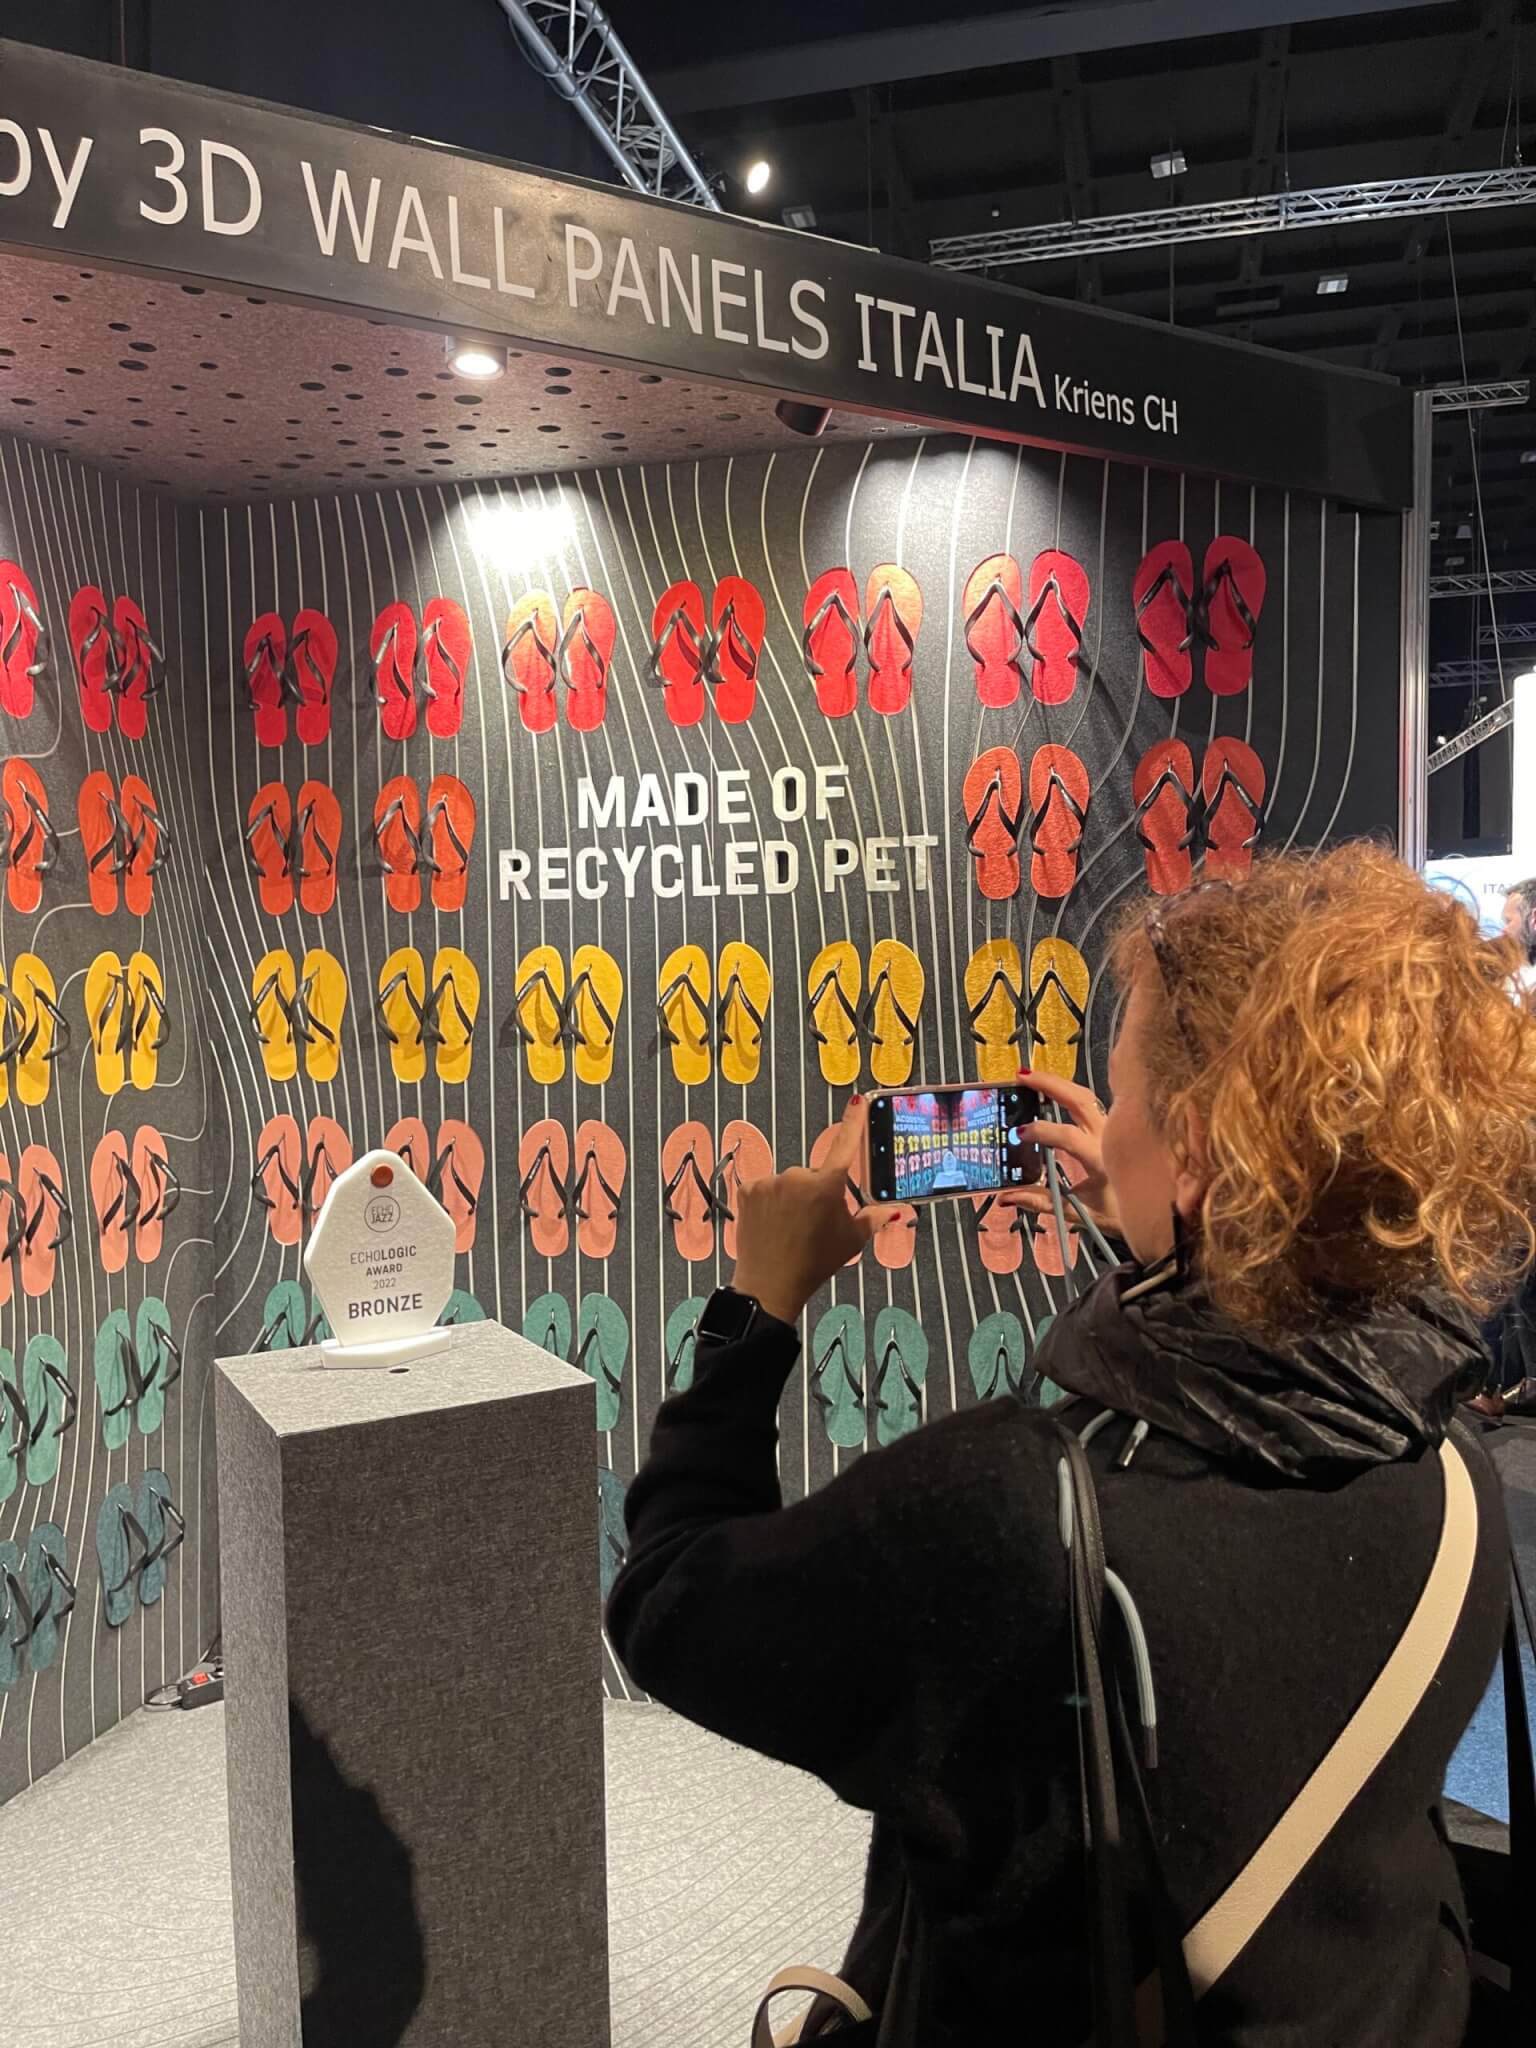 ECHOJAZZ and 3D Wall Panels Italia at the trade fair Architect@Work Milan 2022